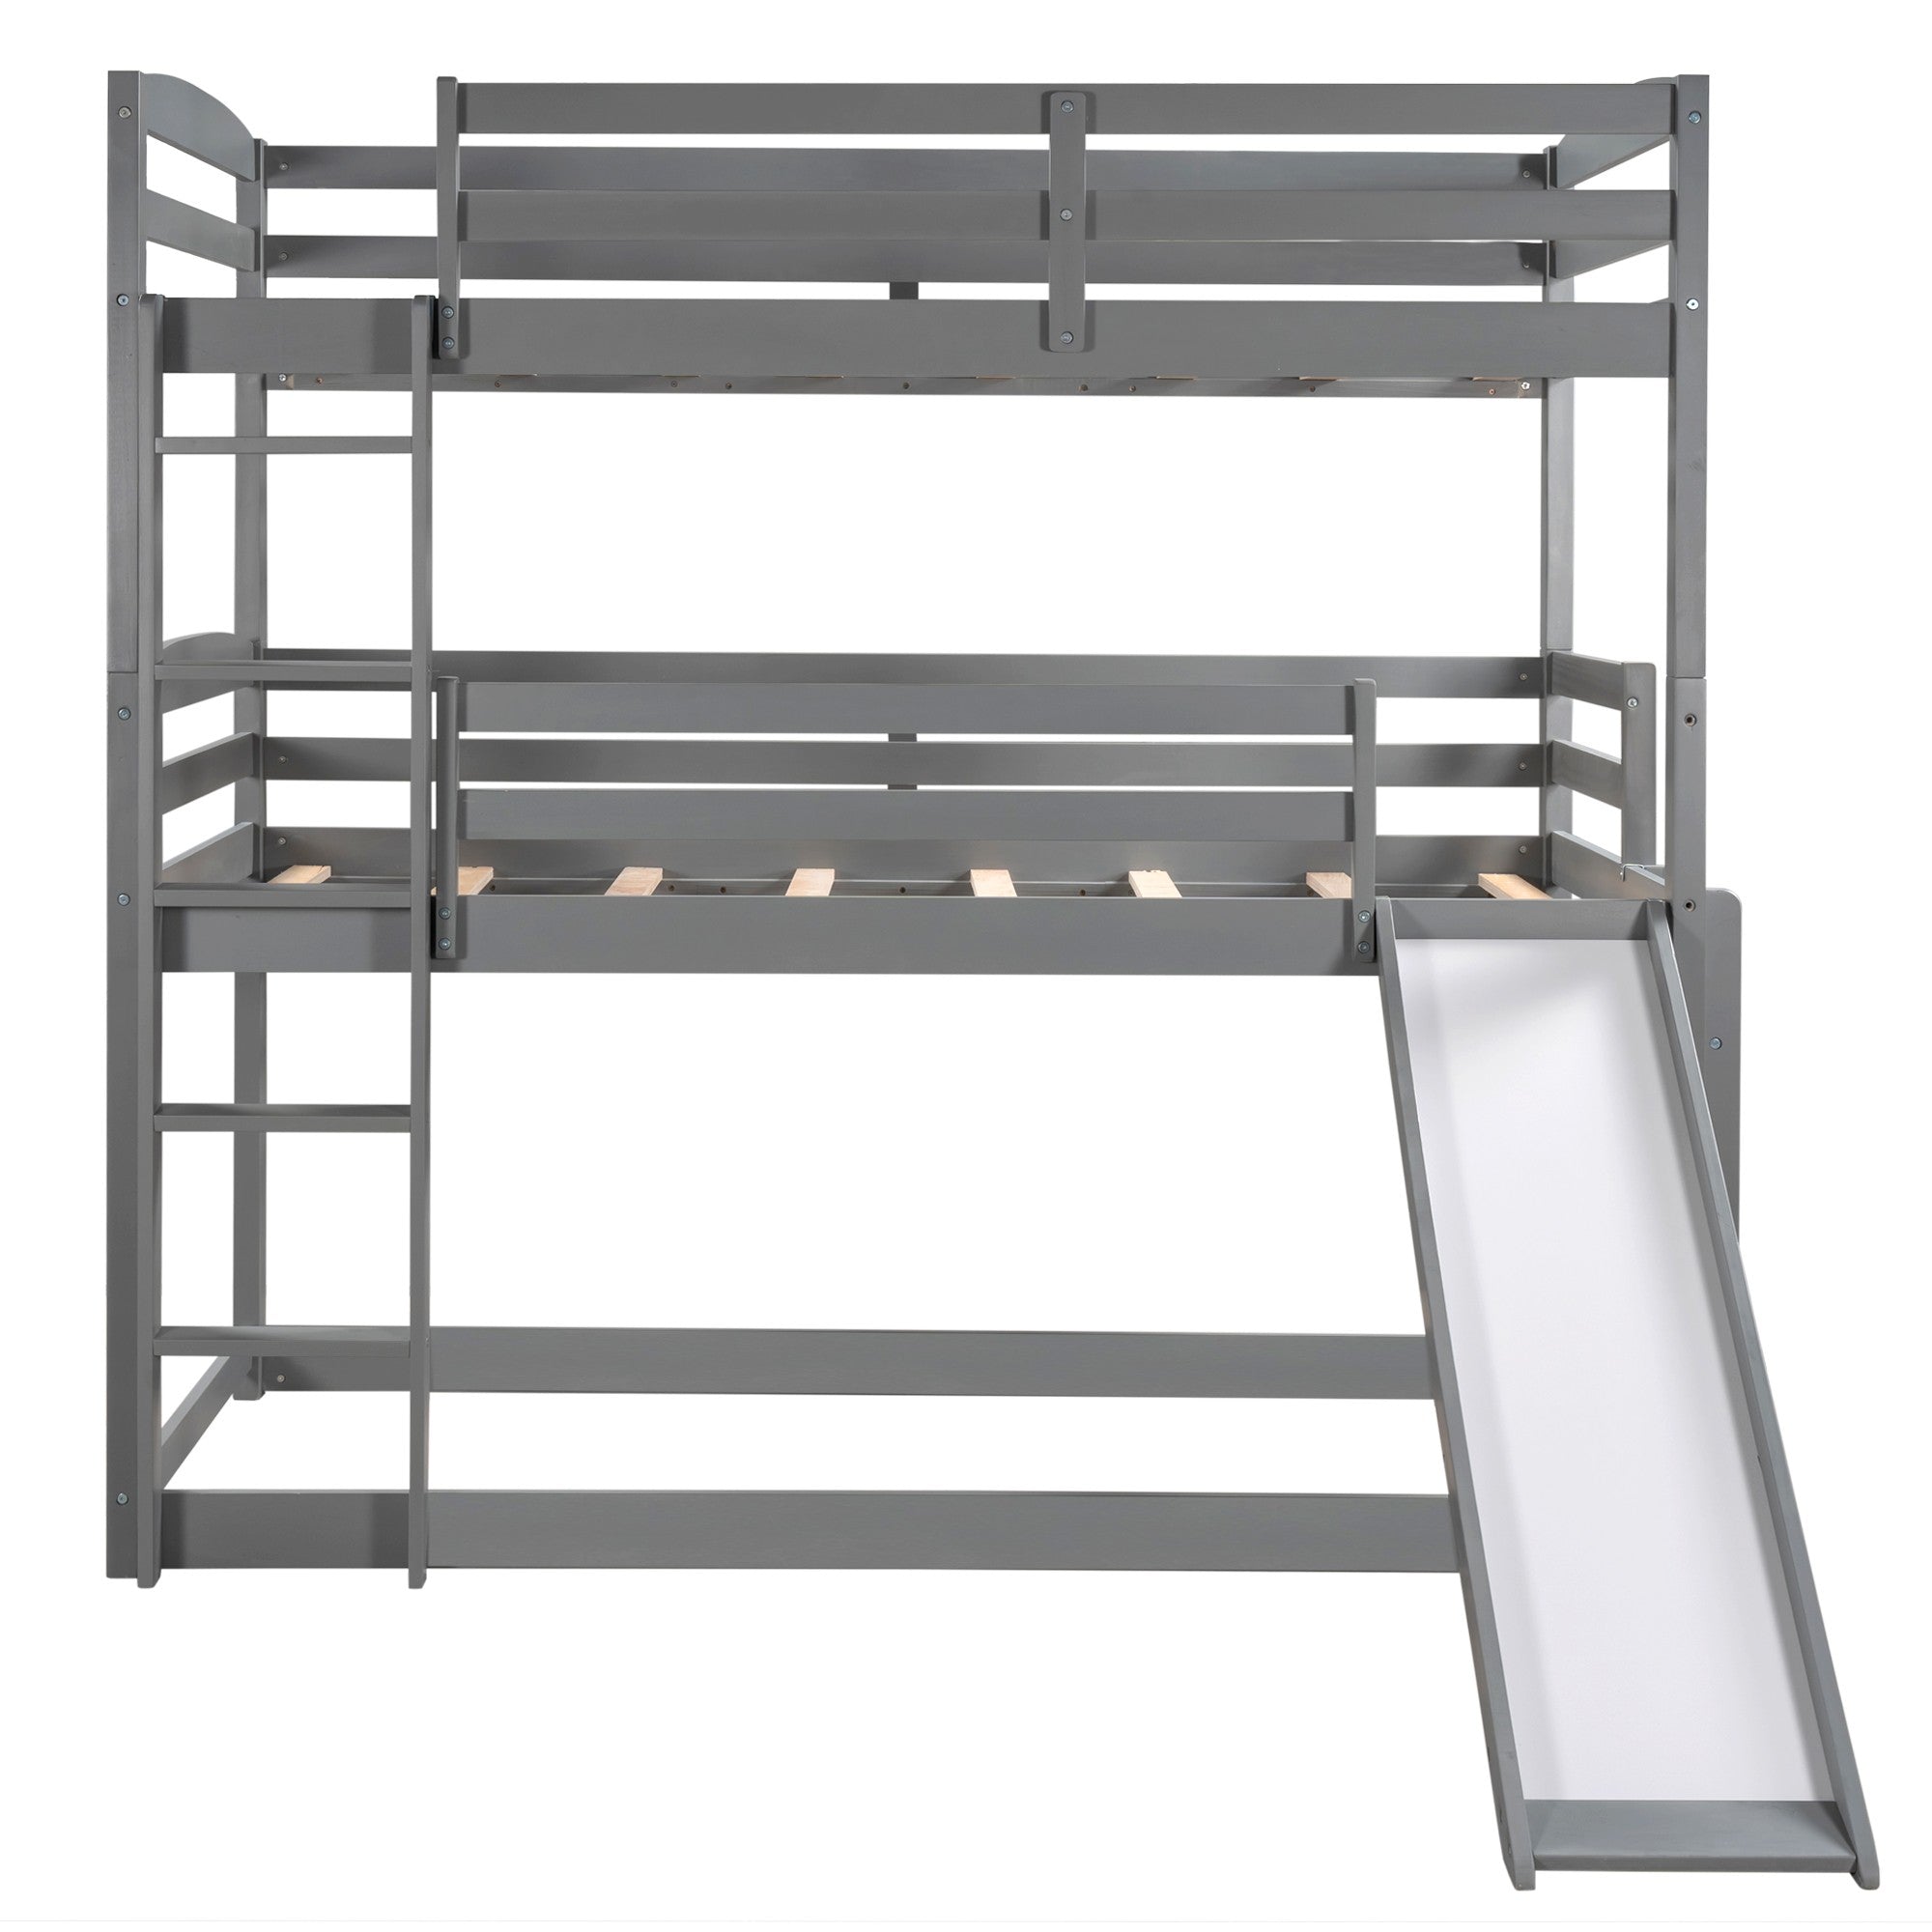 Gray Triple Bunk Twin Sized Bed with Slide